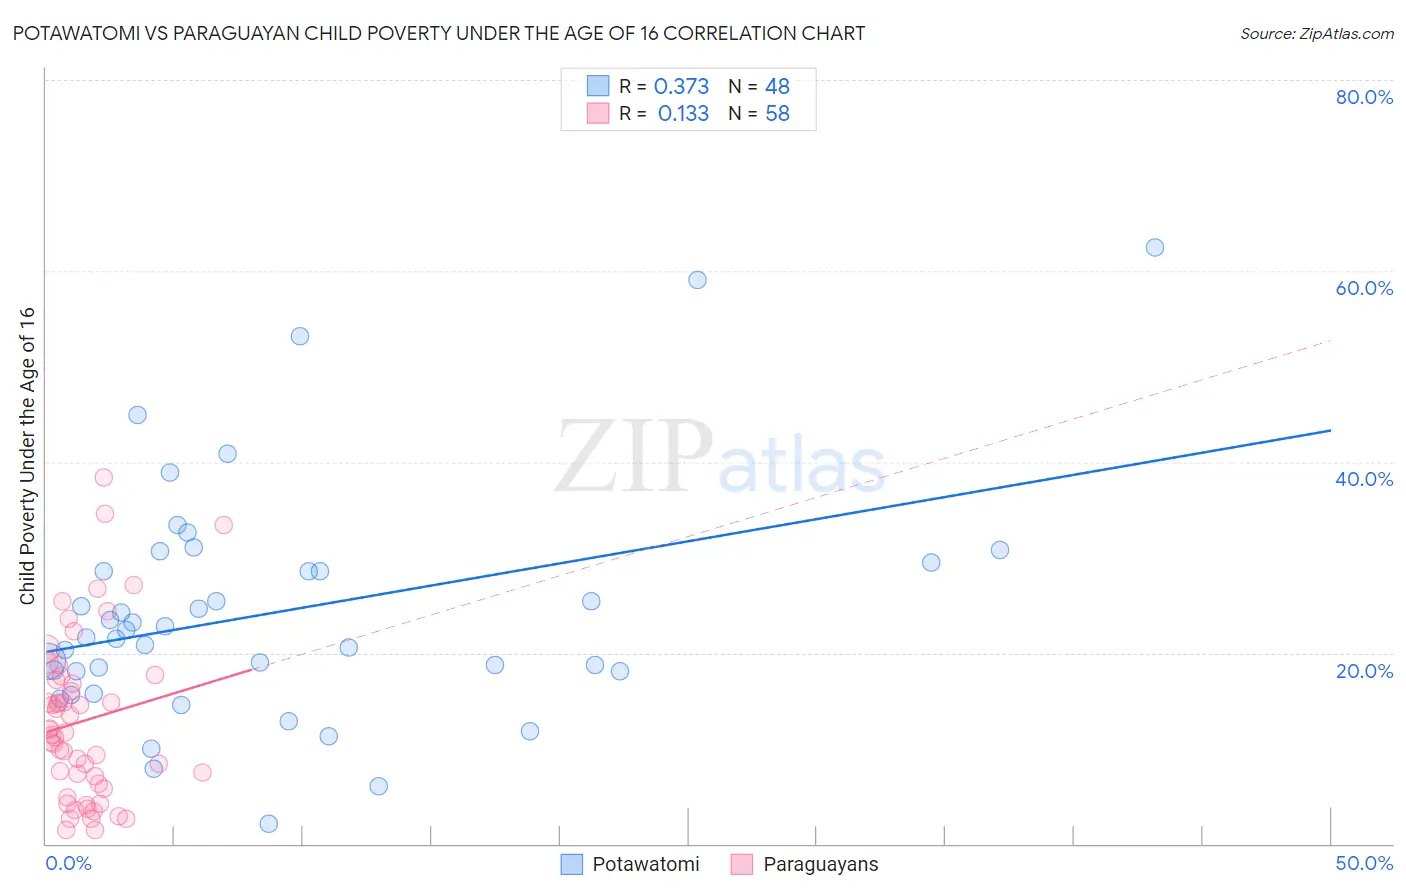 Potawatomi vs Paraguayan Child Poverty Under the Age of 16